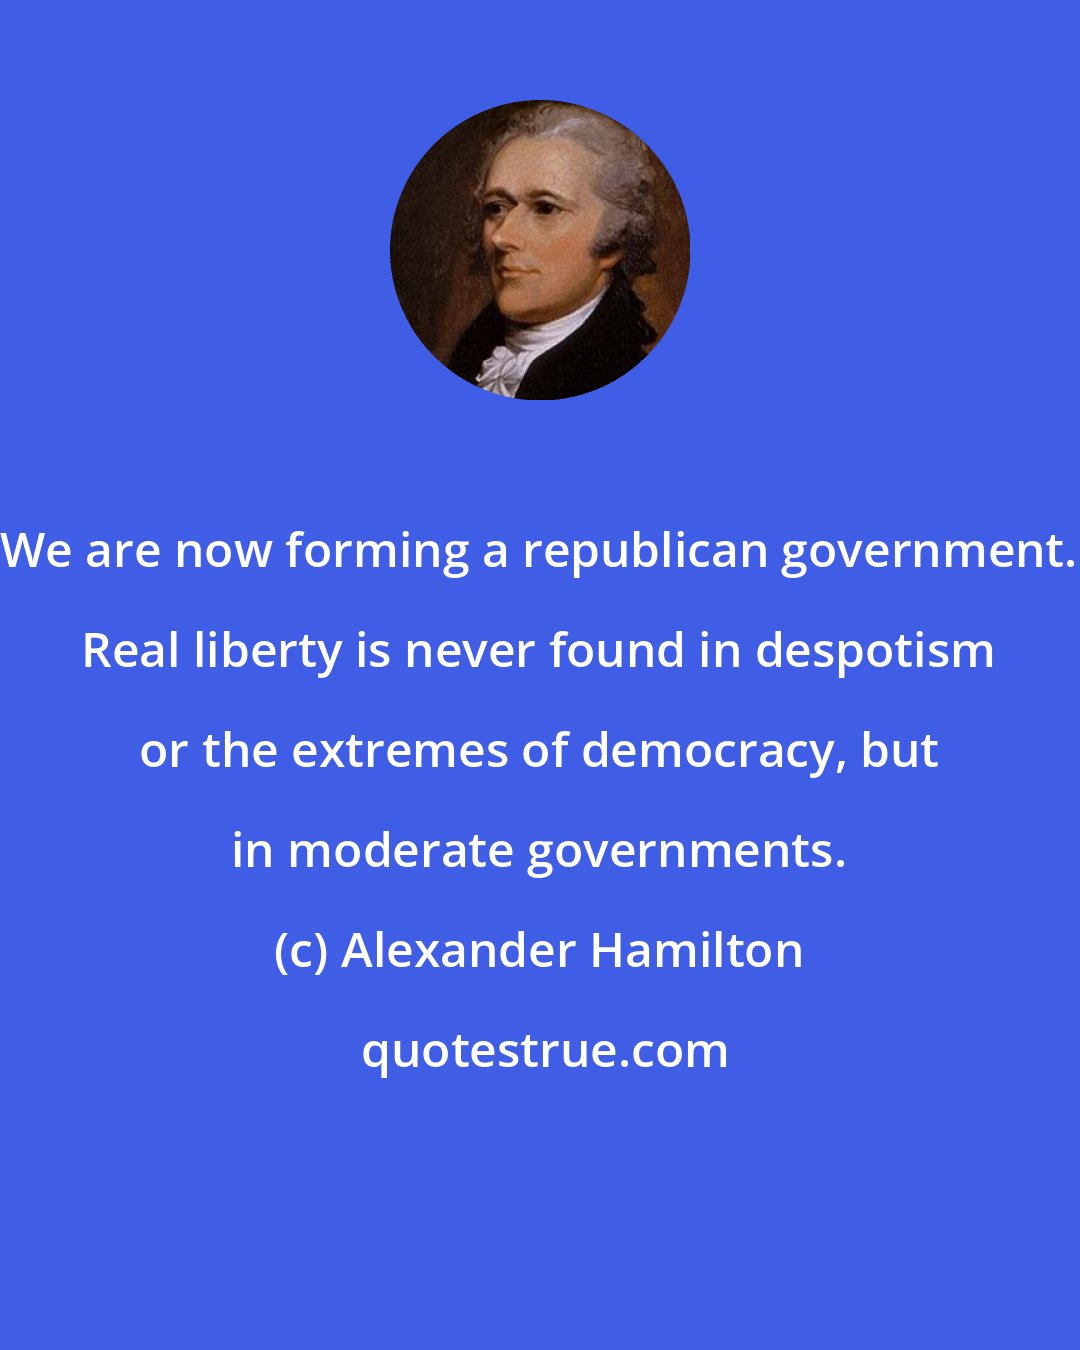 Alexander Hamilton: We are now forming a republican government. Real liberty is never found in despotism or the extremes of democracy, but in moderate governments.